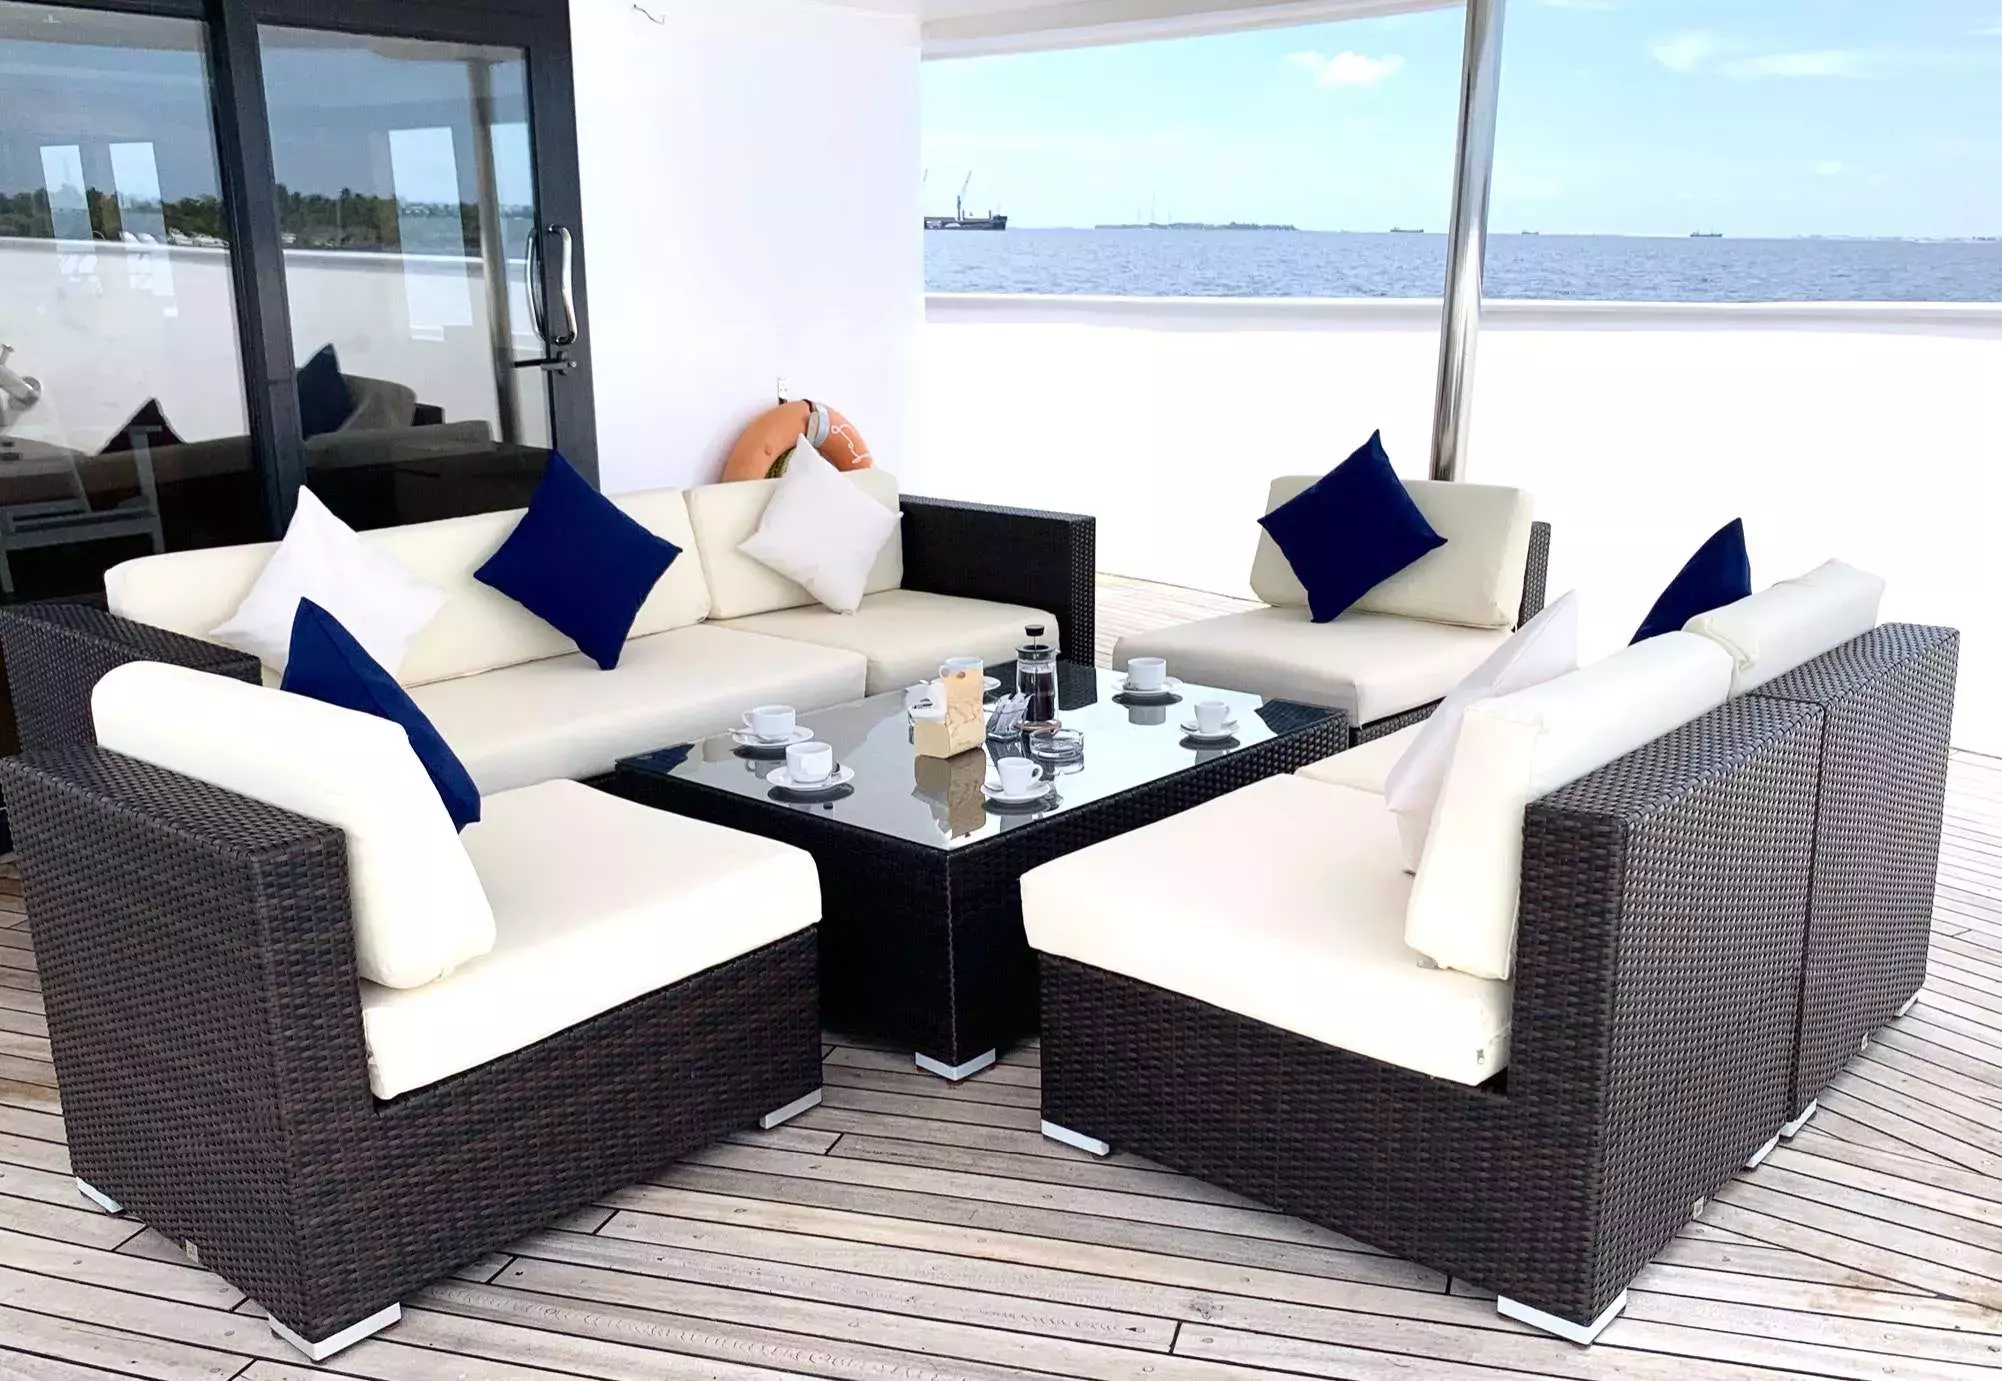 Safira by Custom Made - Top rates for a Rental of a private Superyacht in Madagascar